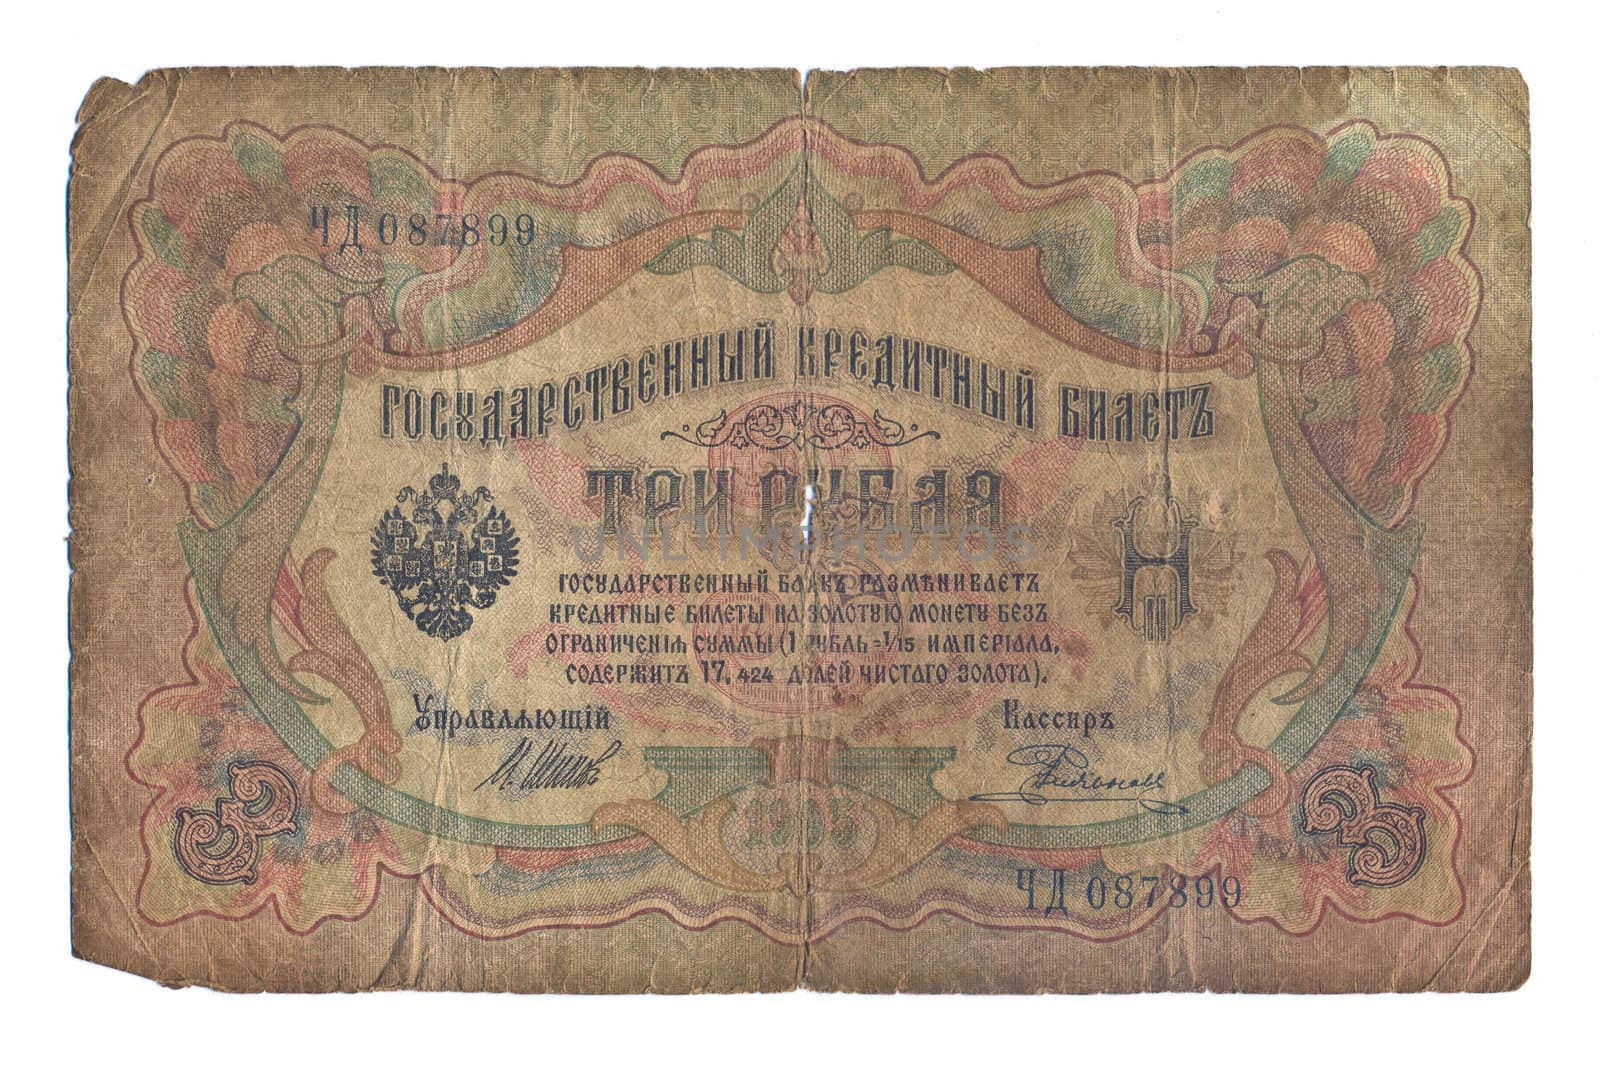 The scanned monetary denomination which is a museum piece, advantage in 3 roubles, let out at the time of Imperial Russia